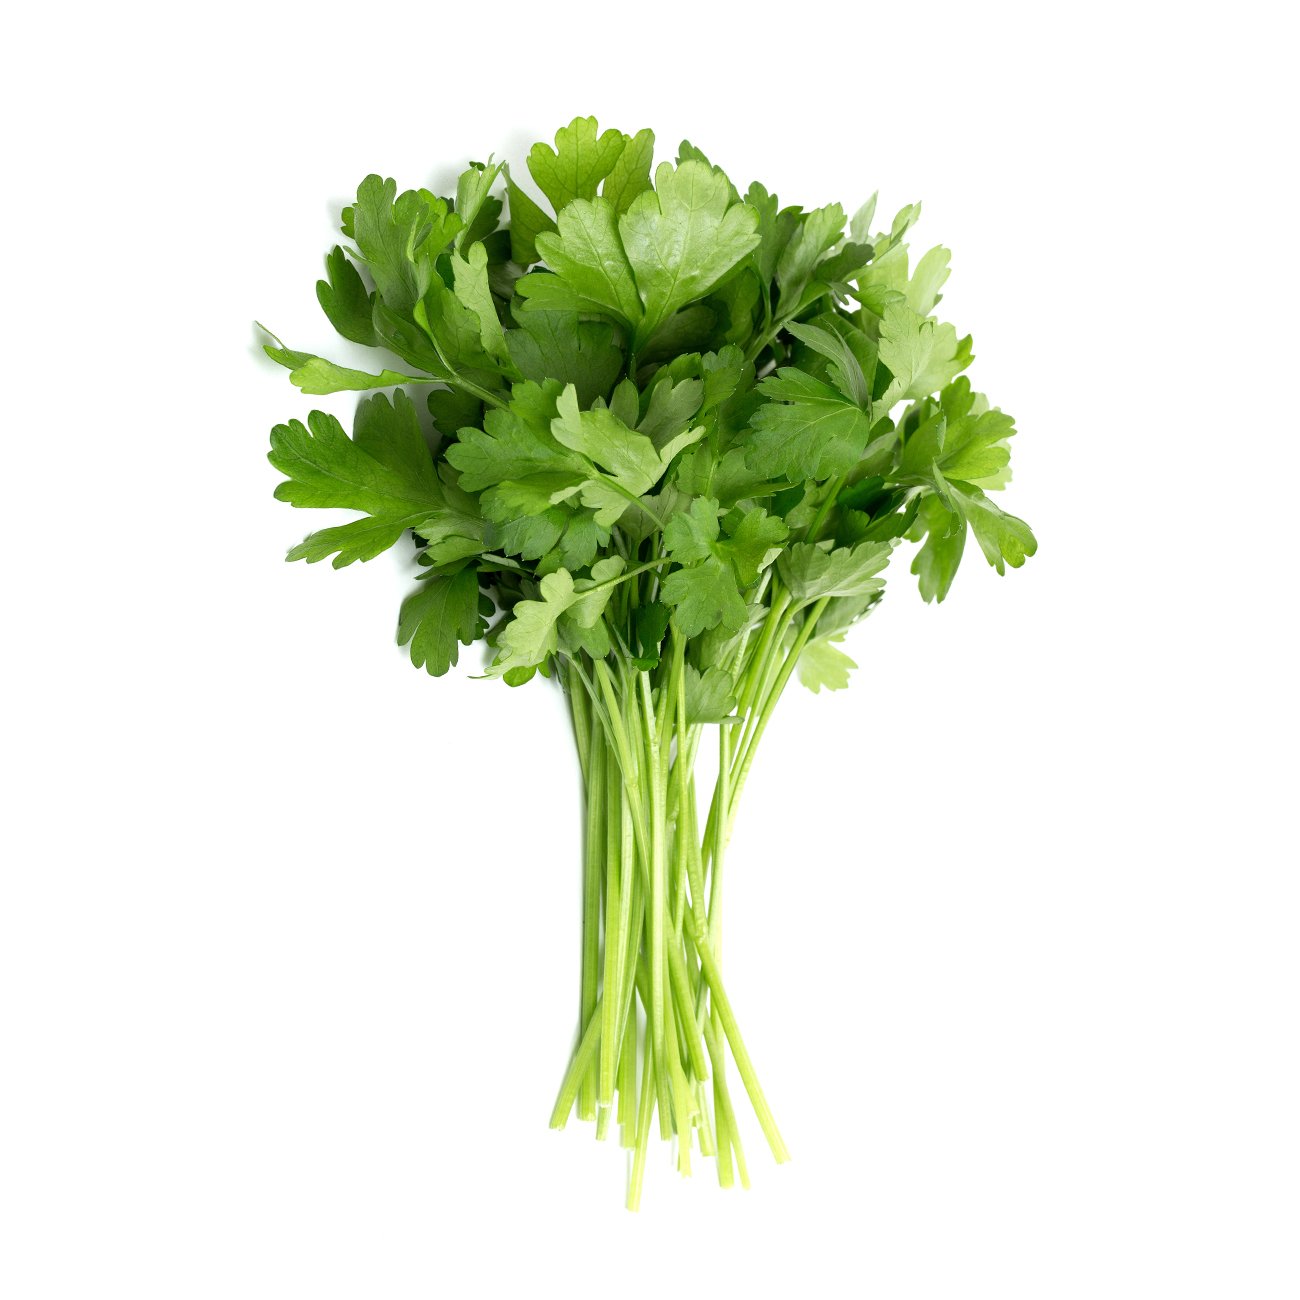 Parsley, continental